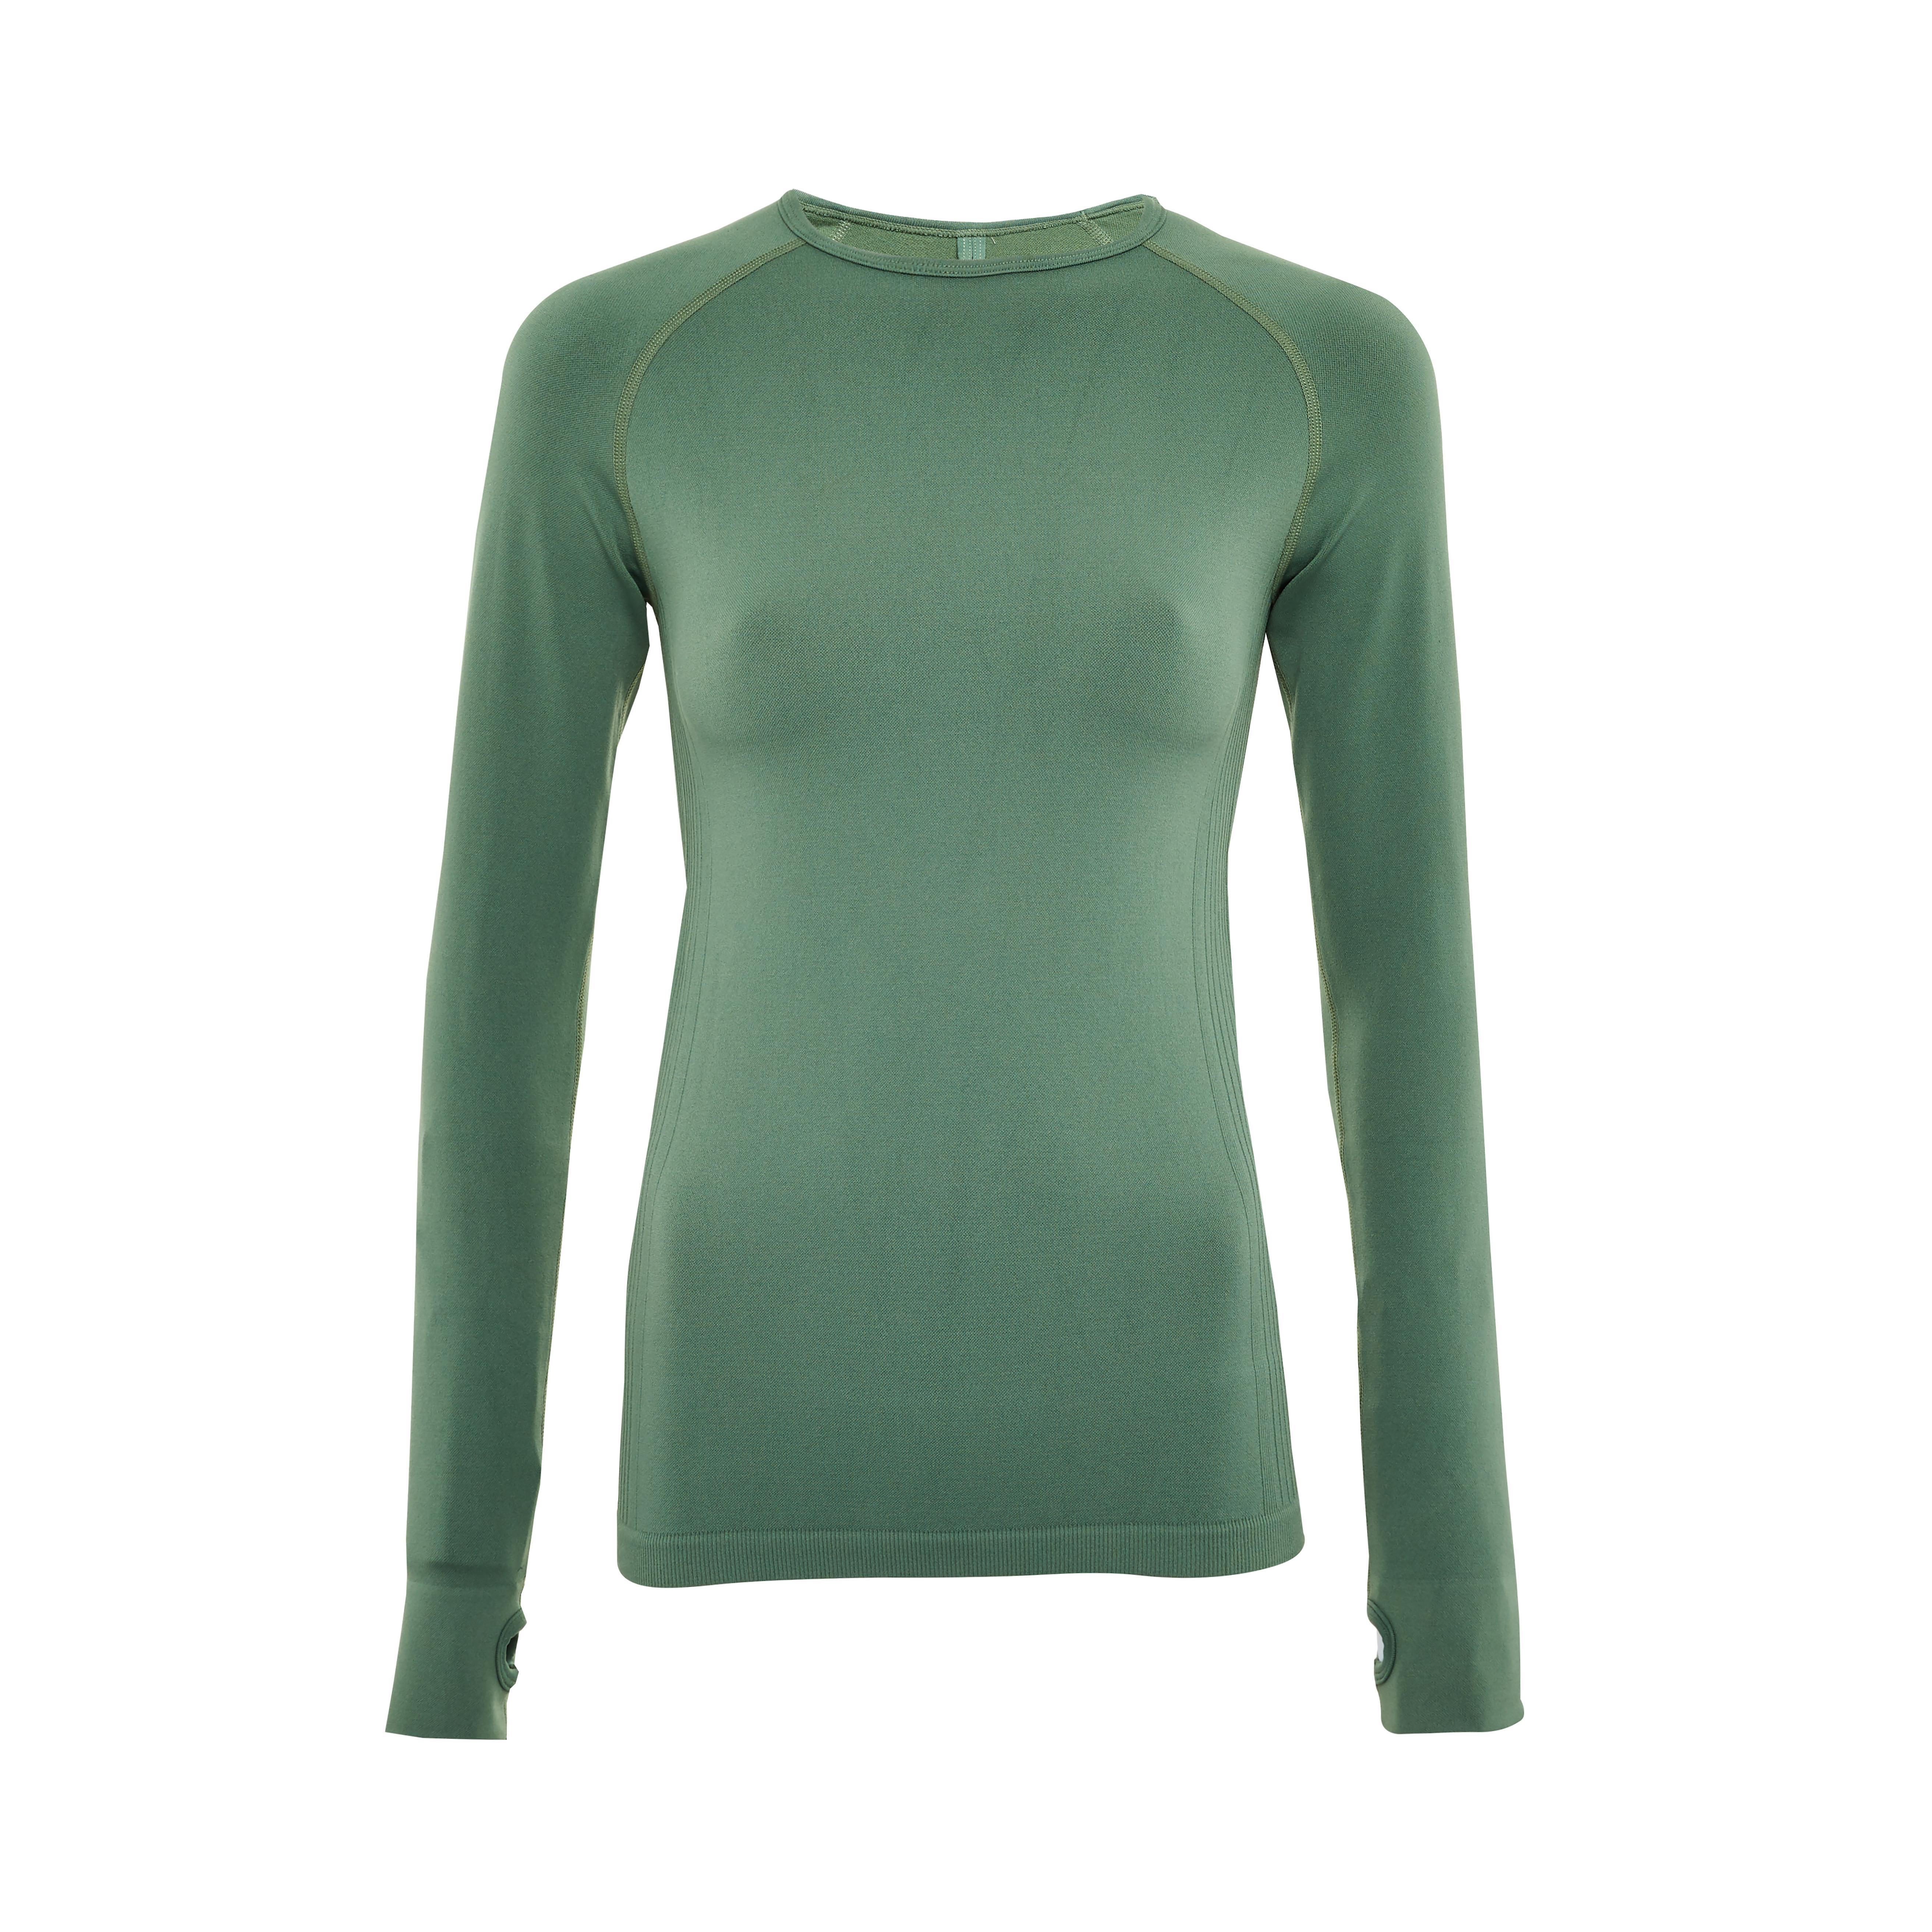 Voornaamwoord voorspelling onze Green Seamfree Long Sleeve T-Shirt | Women's Gym Looks | Women's Style |  Our Womenswear Collections | All Primark Products | Primark